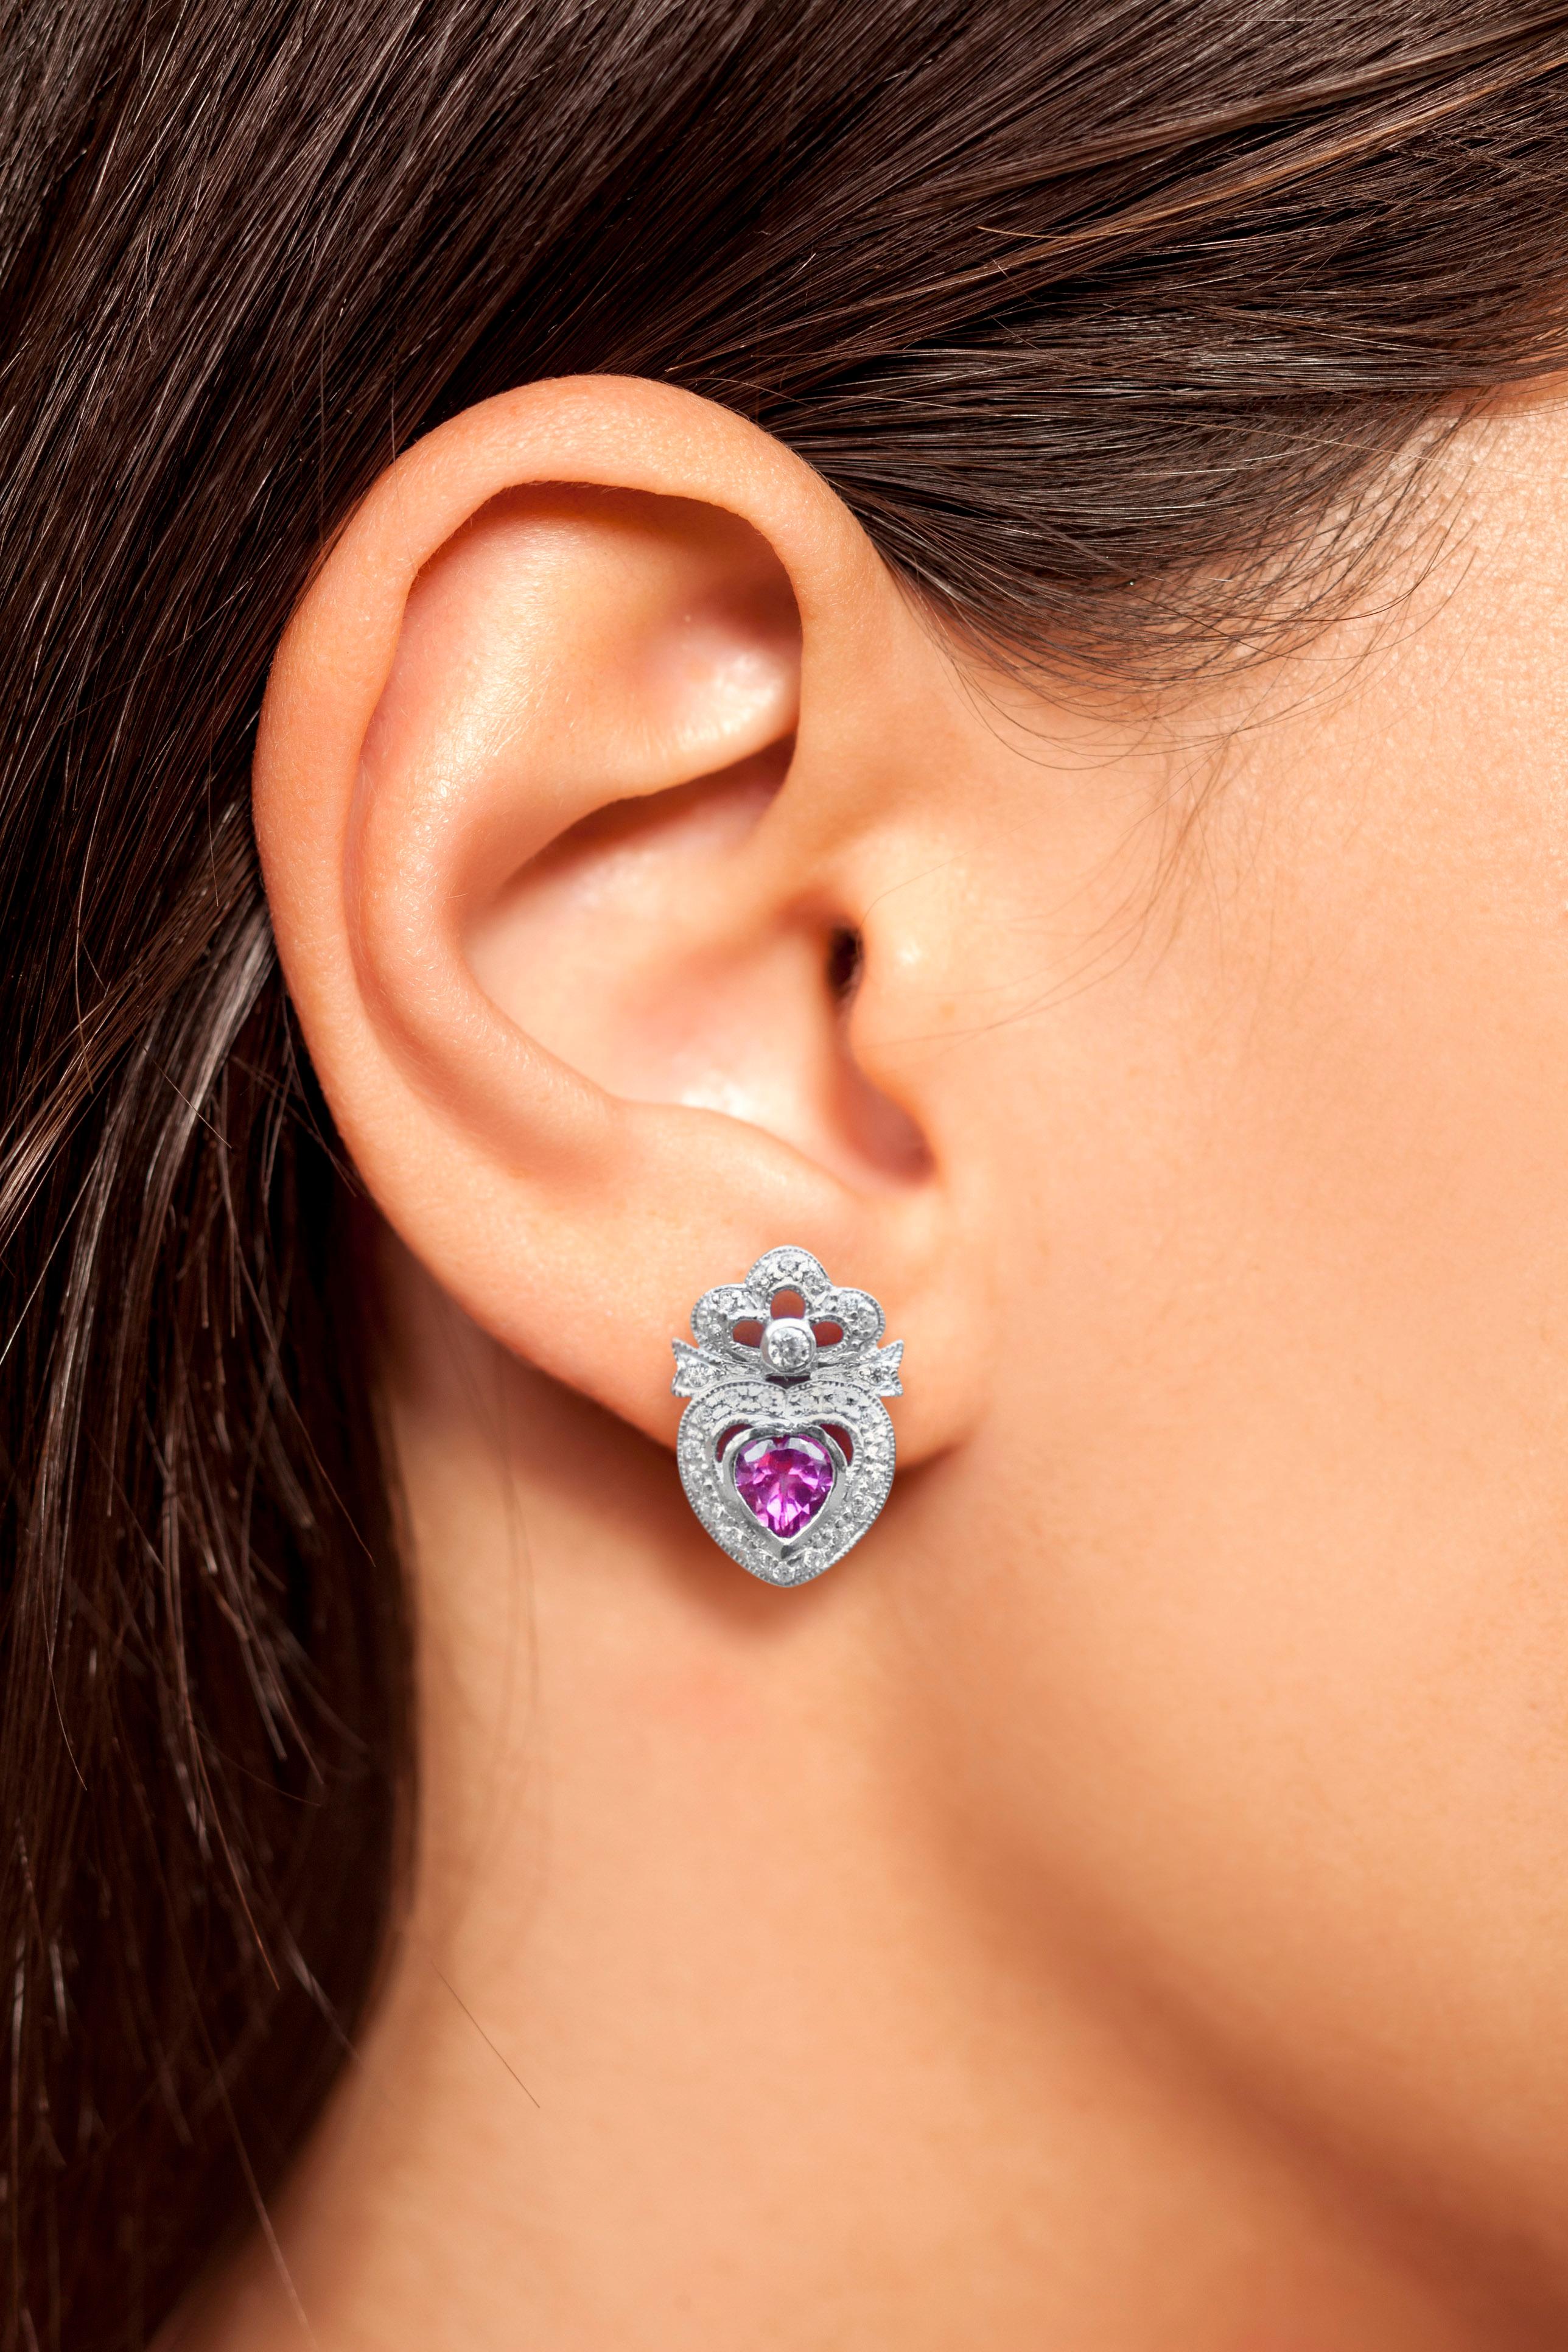 These adorable Pink Topaz and Diamond Heart Shape Studs feature a beaming 2-carat heart cut pink topaz as its center gemstone. The pink topaz is set in 14K white gold and decorated with 54 surrounding diamond simulants on each earring. The earrings